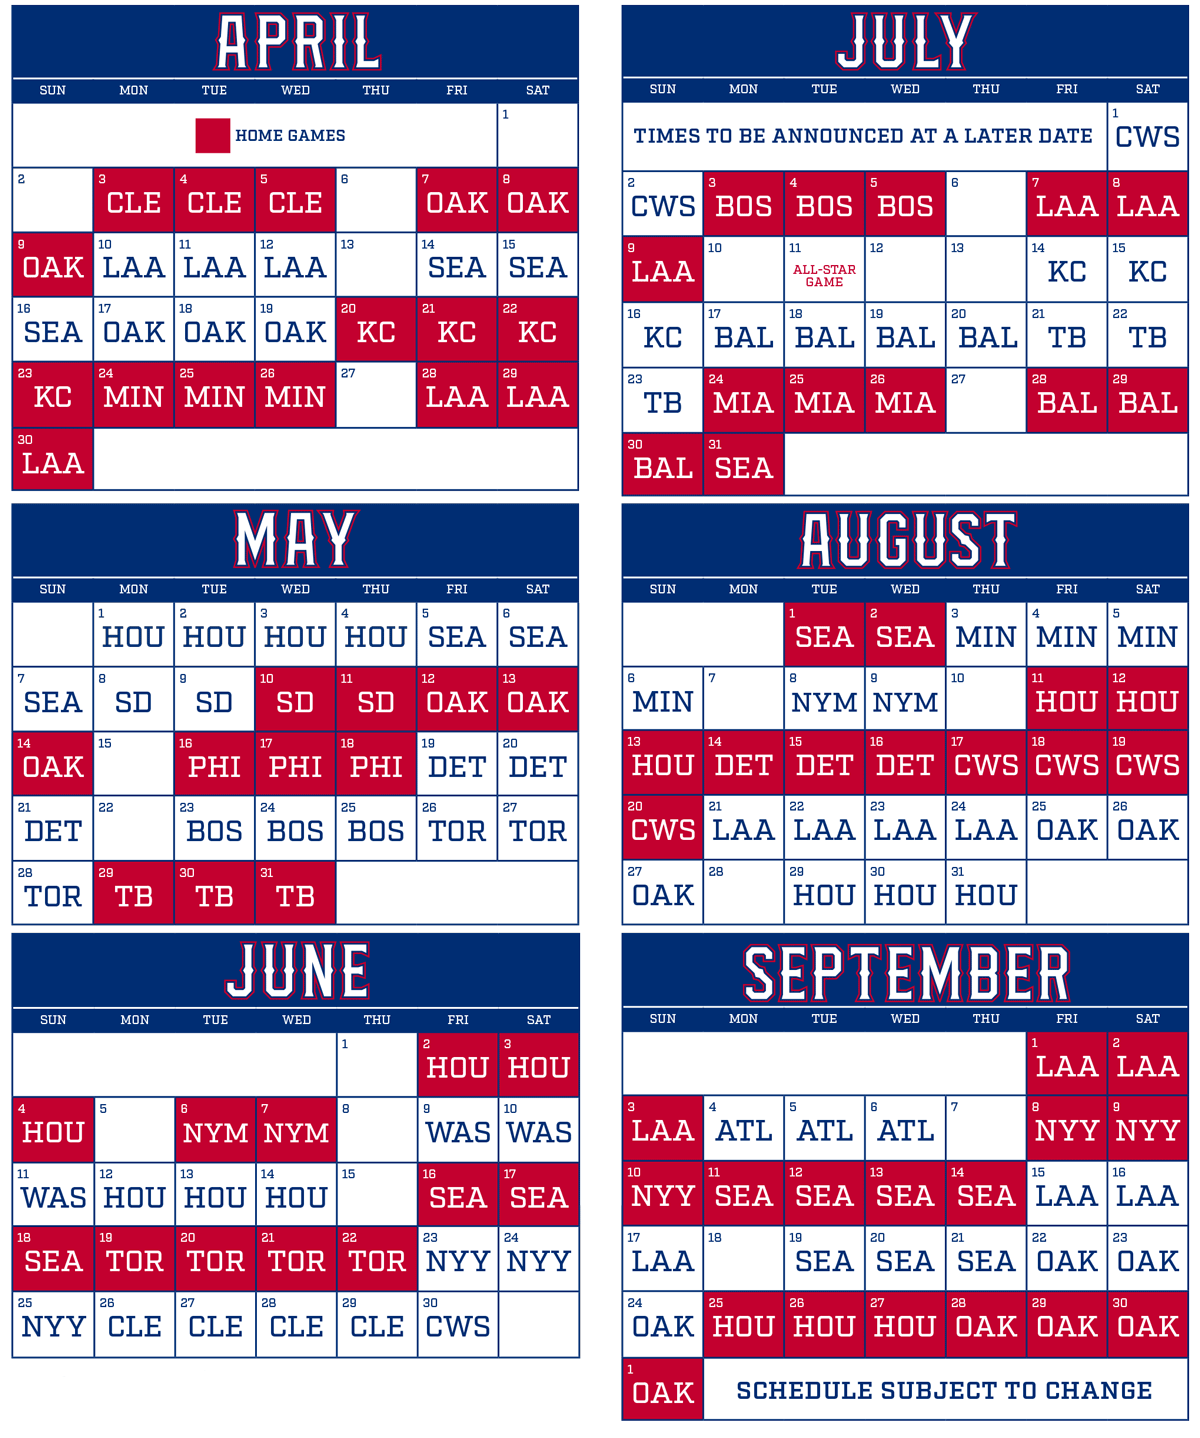 Rangers 2017 schedule released: Texas to open next season at home play